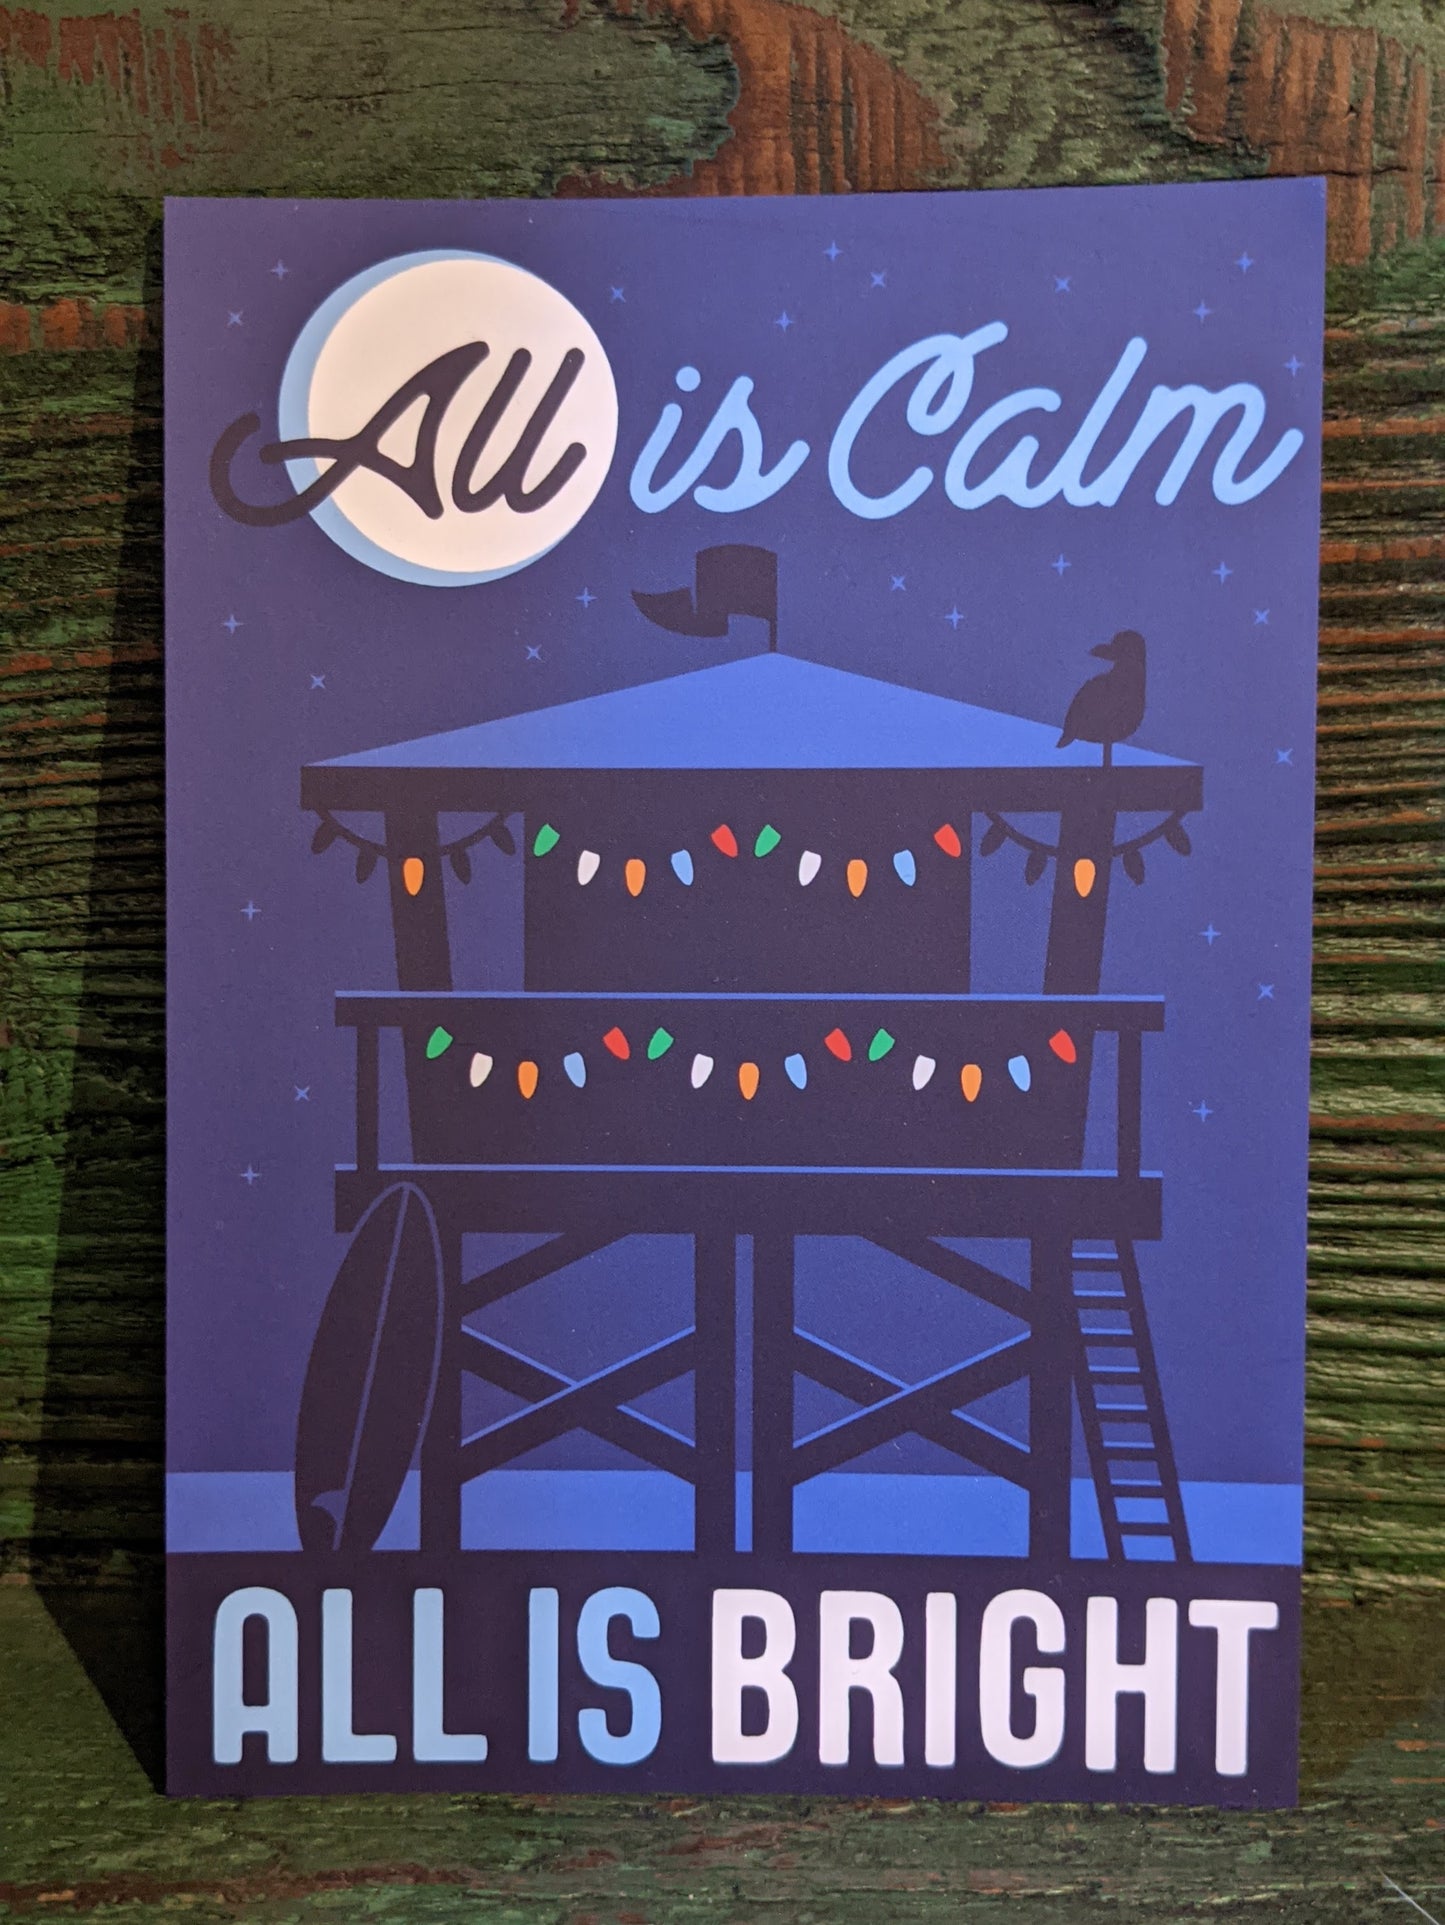 All is Calm, All is bright beach holiday postcard by Poppy & Quail